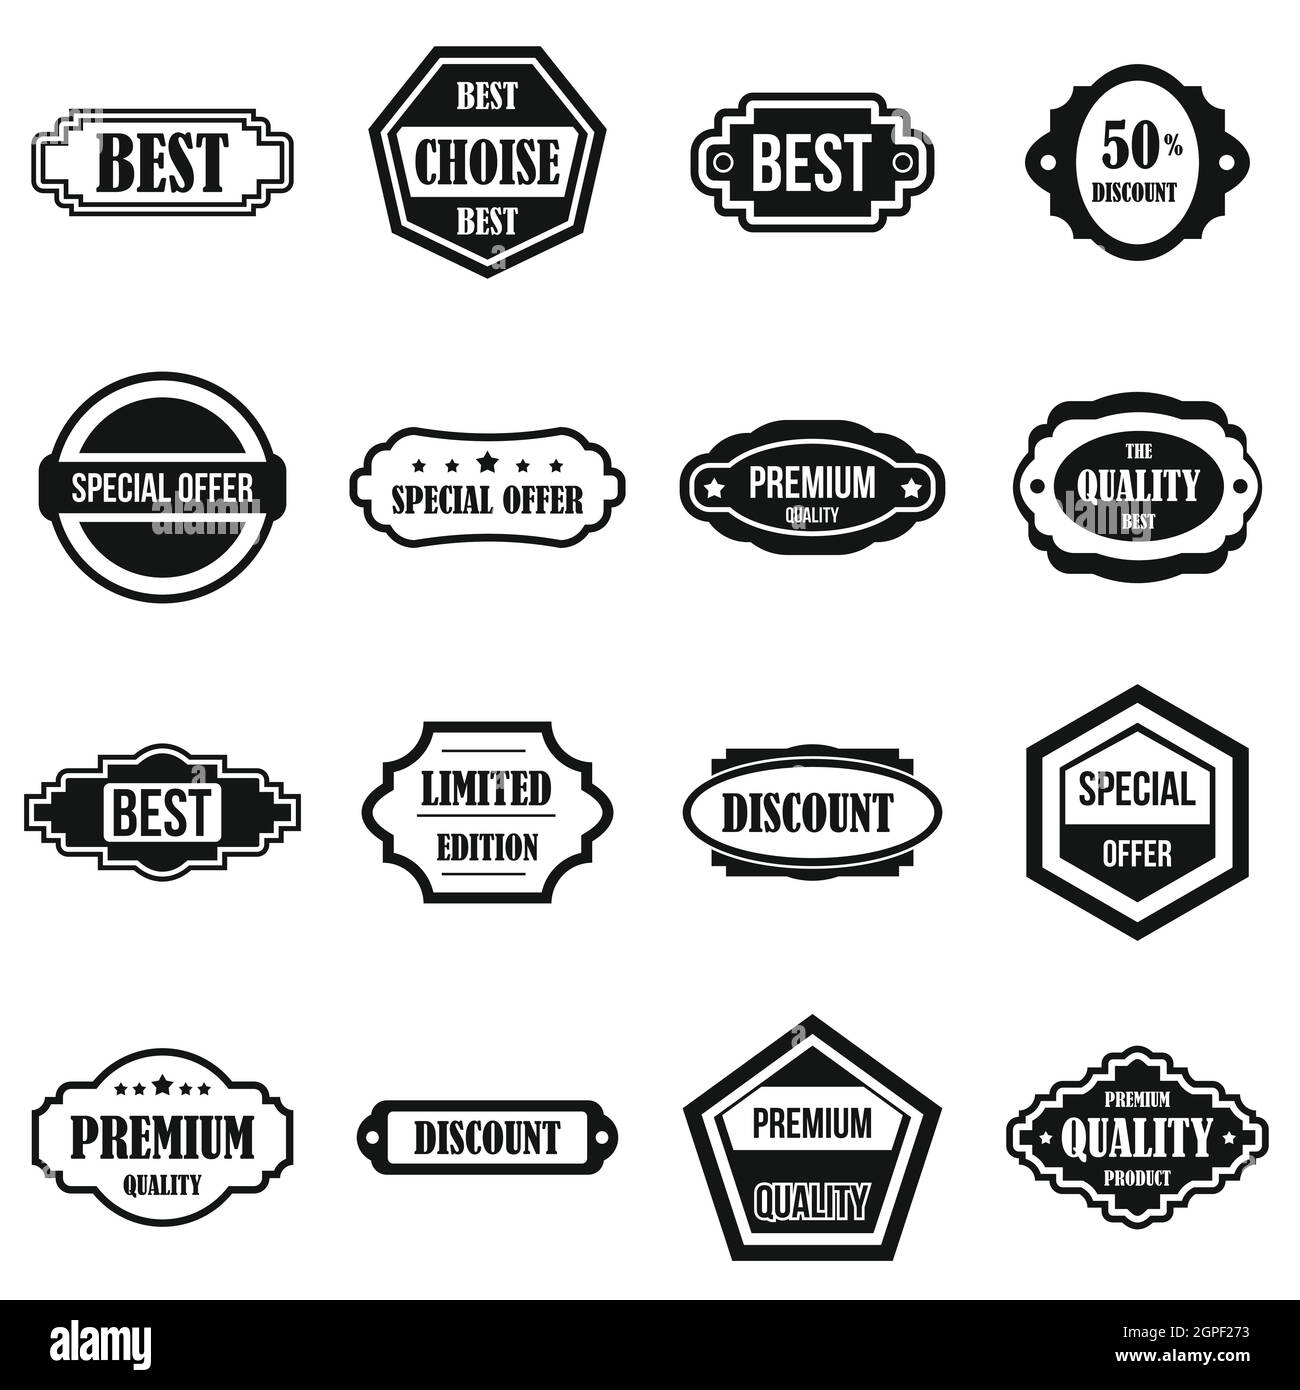 Golden labels icons set, simple style Stock Vector